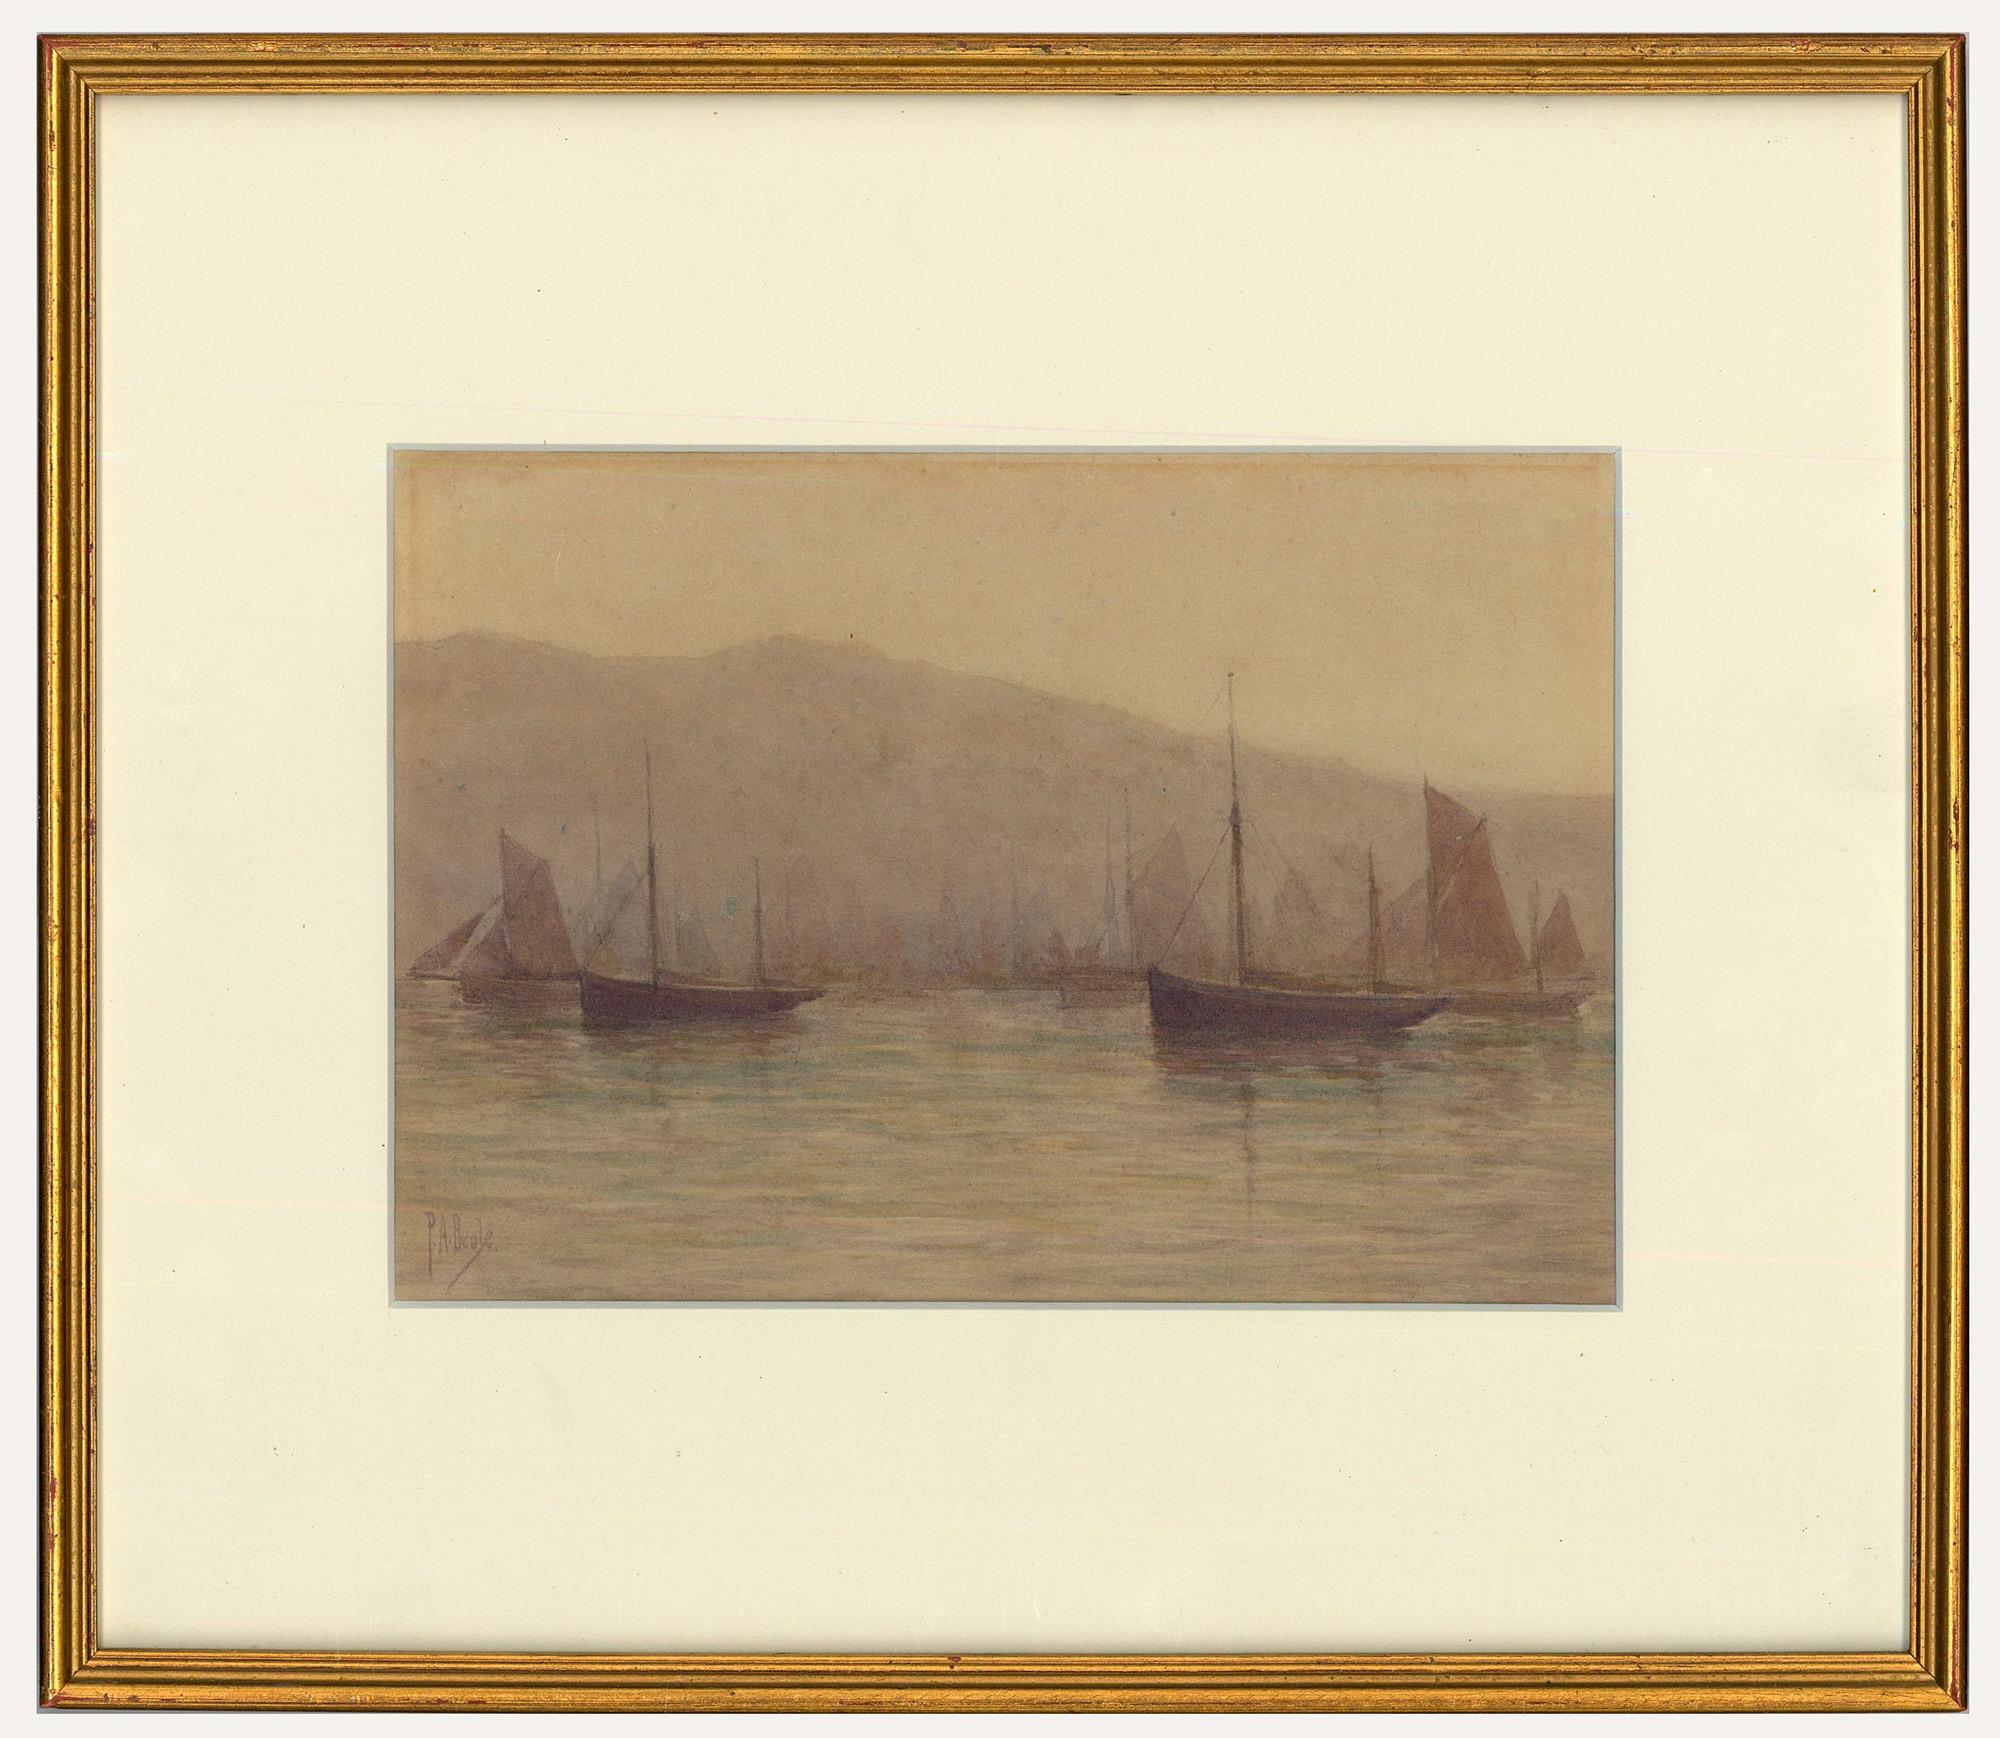 Unknown Figurative Art - P.A. Beale - Framed c.1900 Watercolour, Misty Morning, Trawlers at Brixham